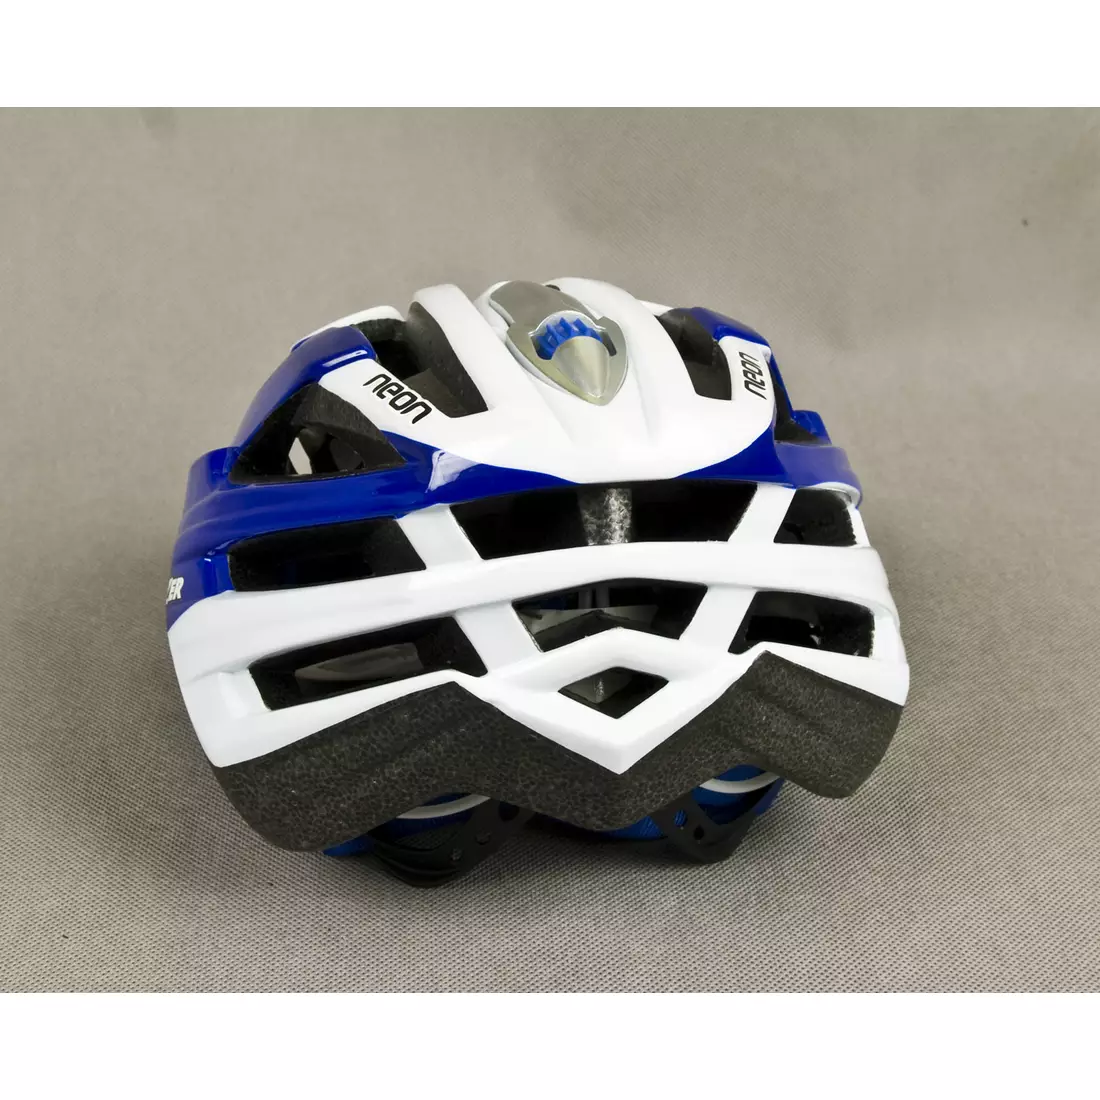 LAZER NEON bicycle helmet blue and white